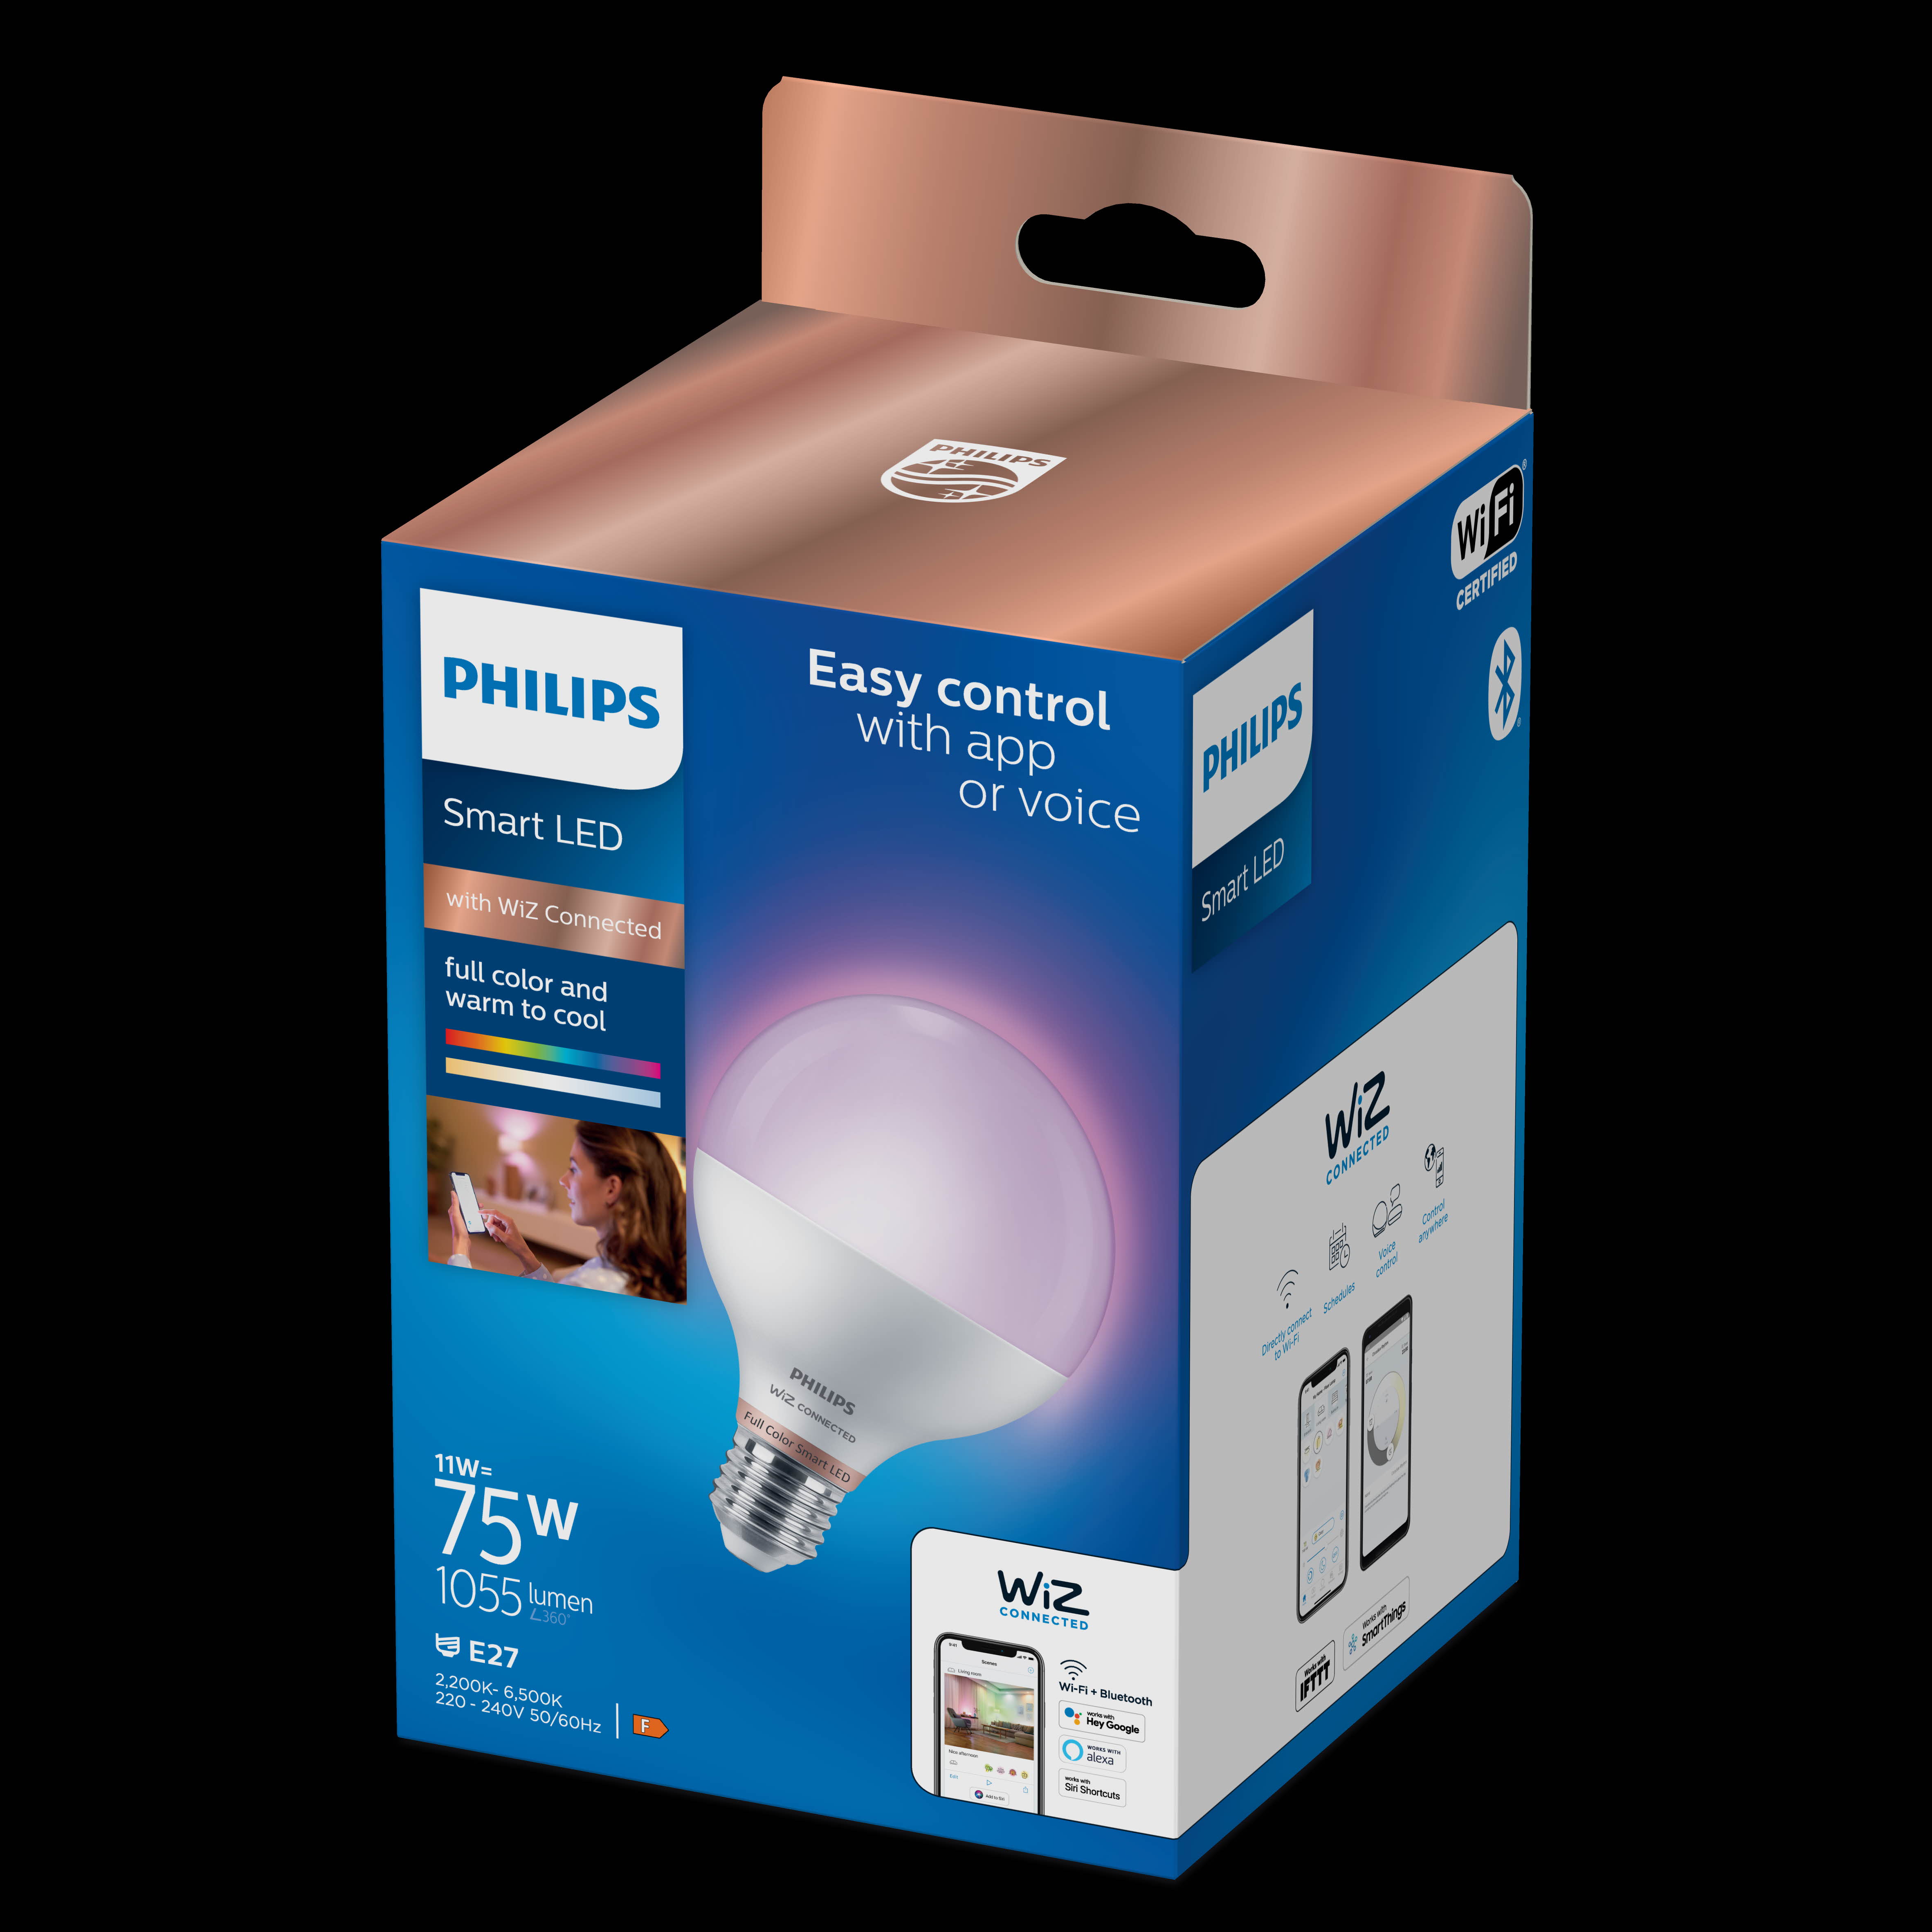 PHILIPS Smart LED E27, WiZ connected, 11 W, 1055 lm, Full color, dimmbar - Globe